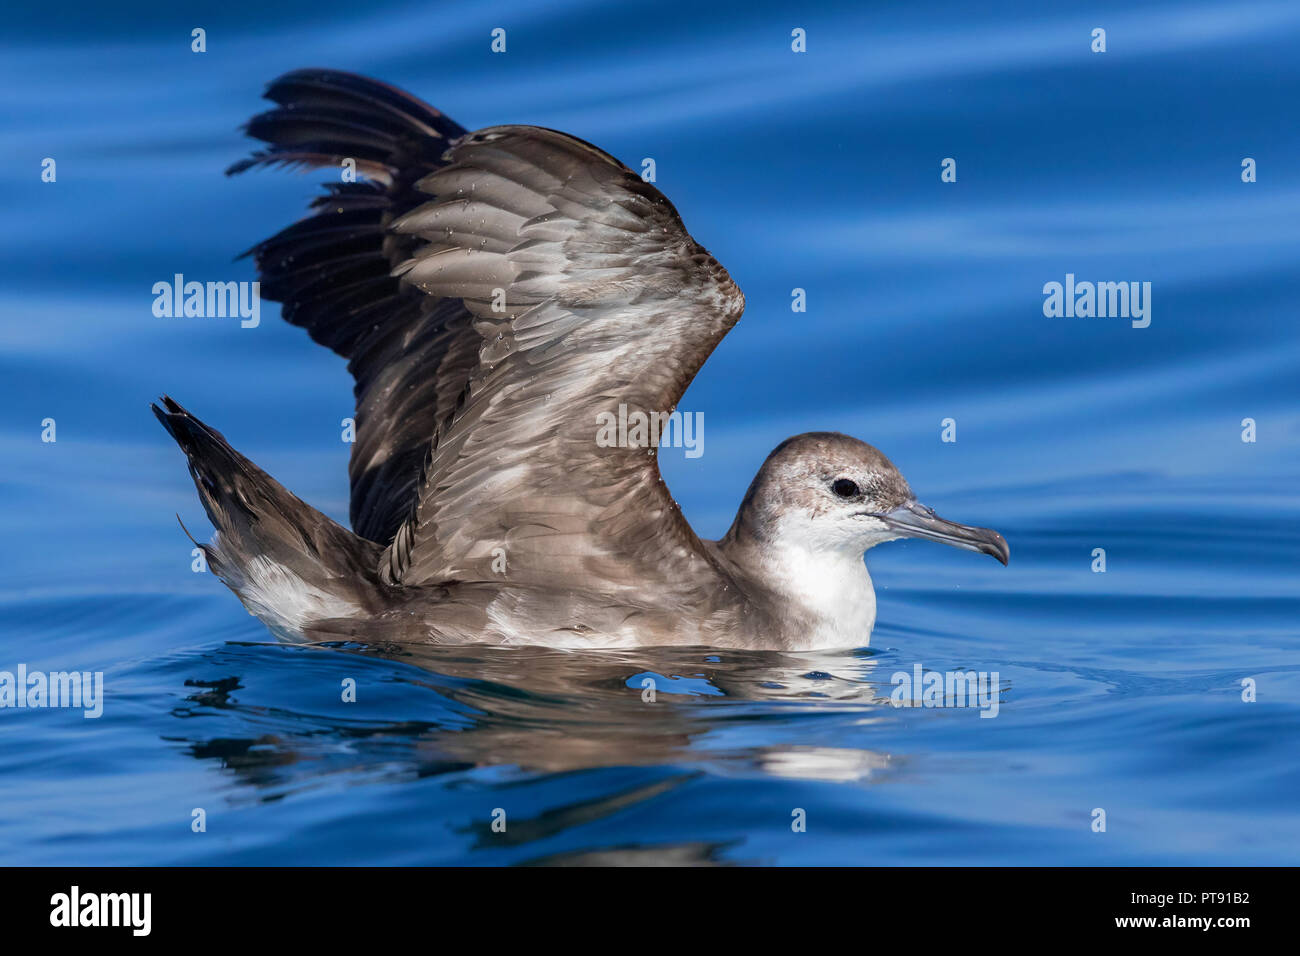 Persian Shearwater (Puffinus persicus), side view of an adult spreading its wings Stock Photo